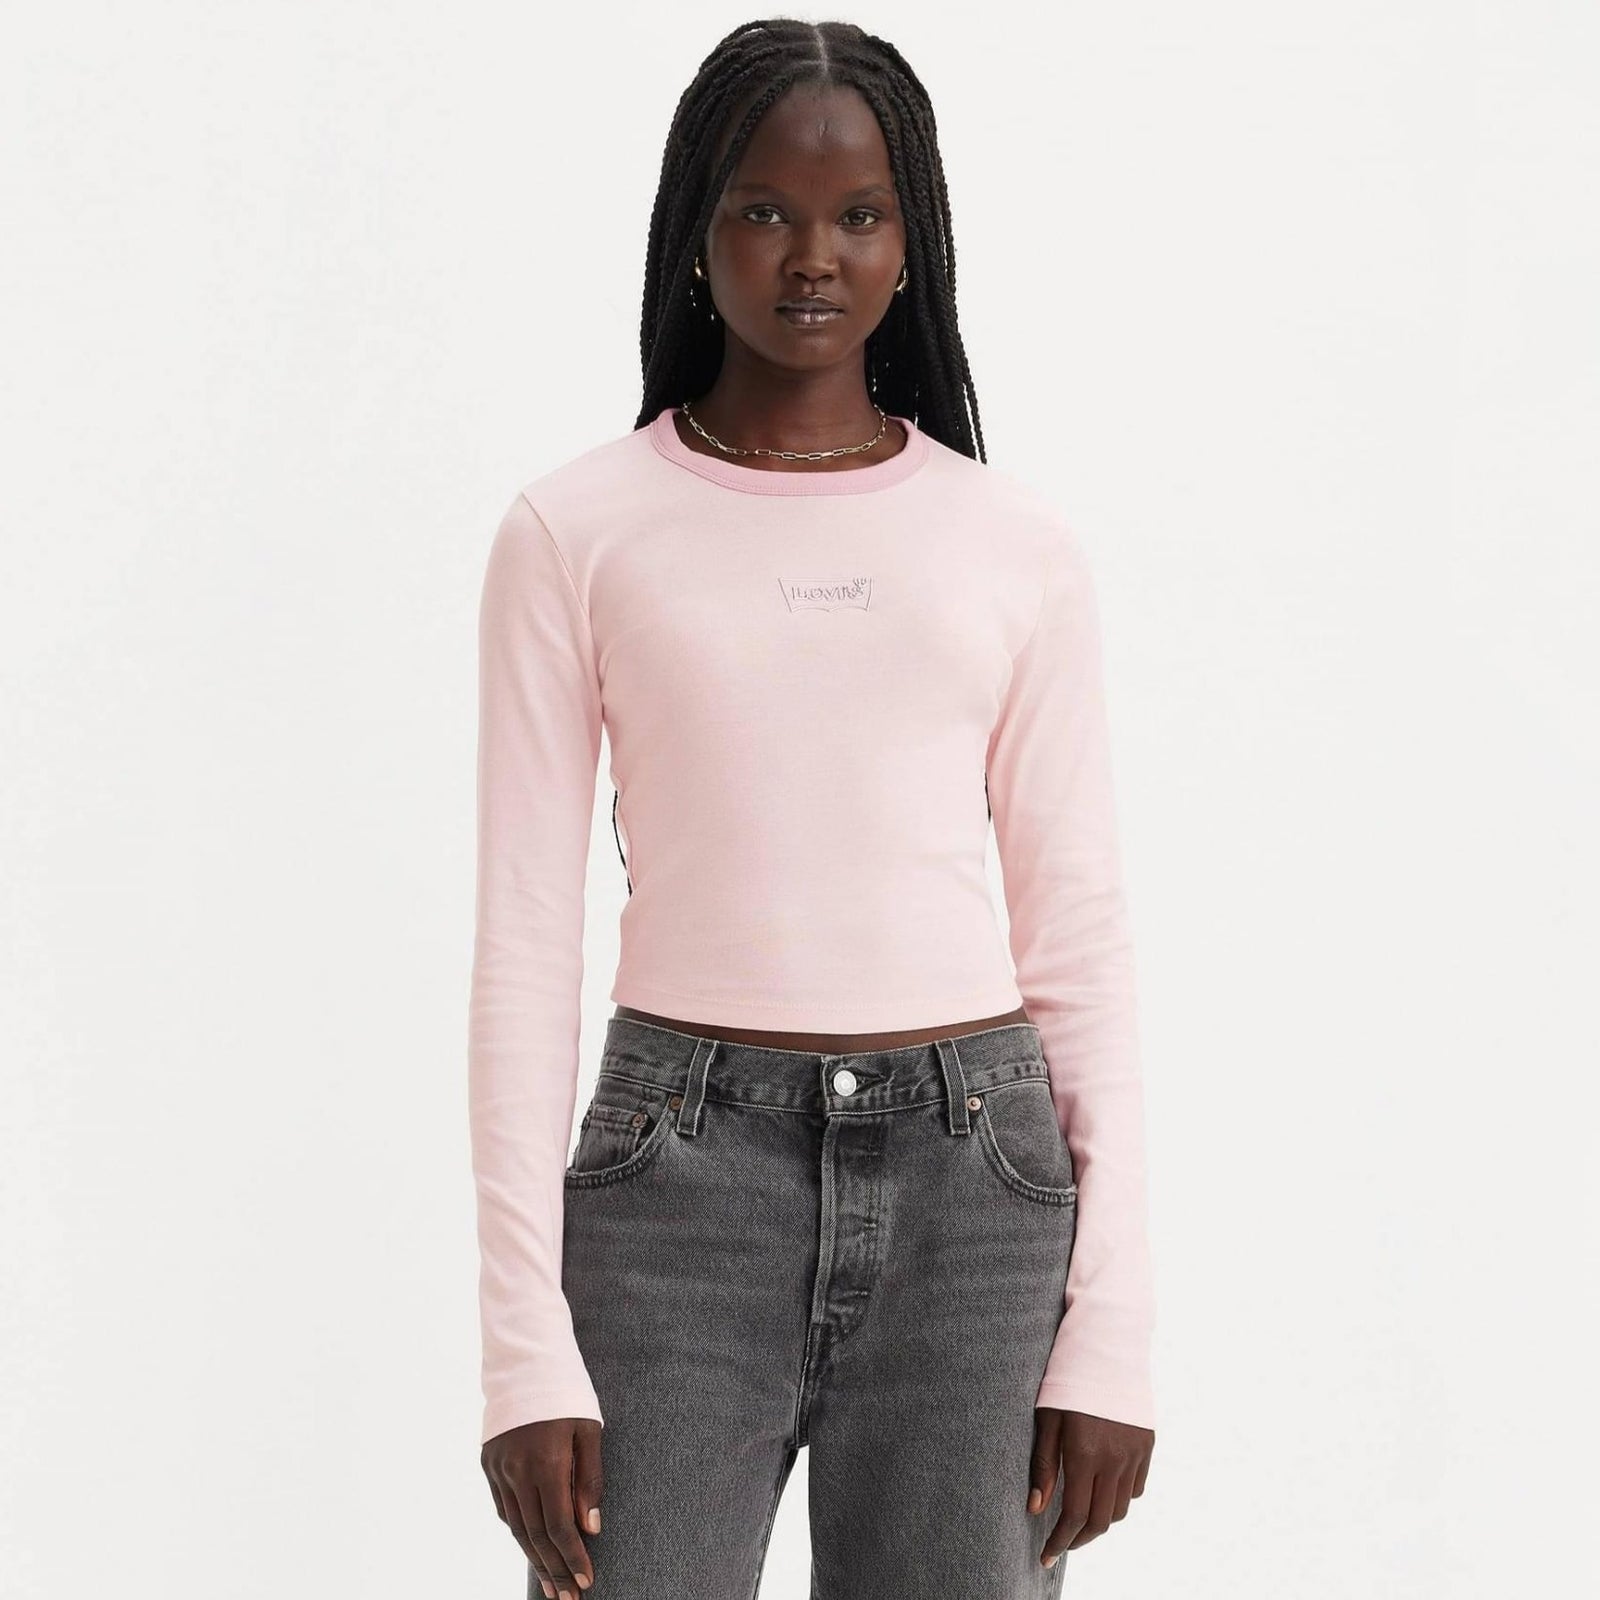 Levi's Graphic Mini Ringer Long Sleeve Tee in Chrome Outline Batwing Mauve Chalk Pink